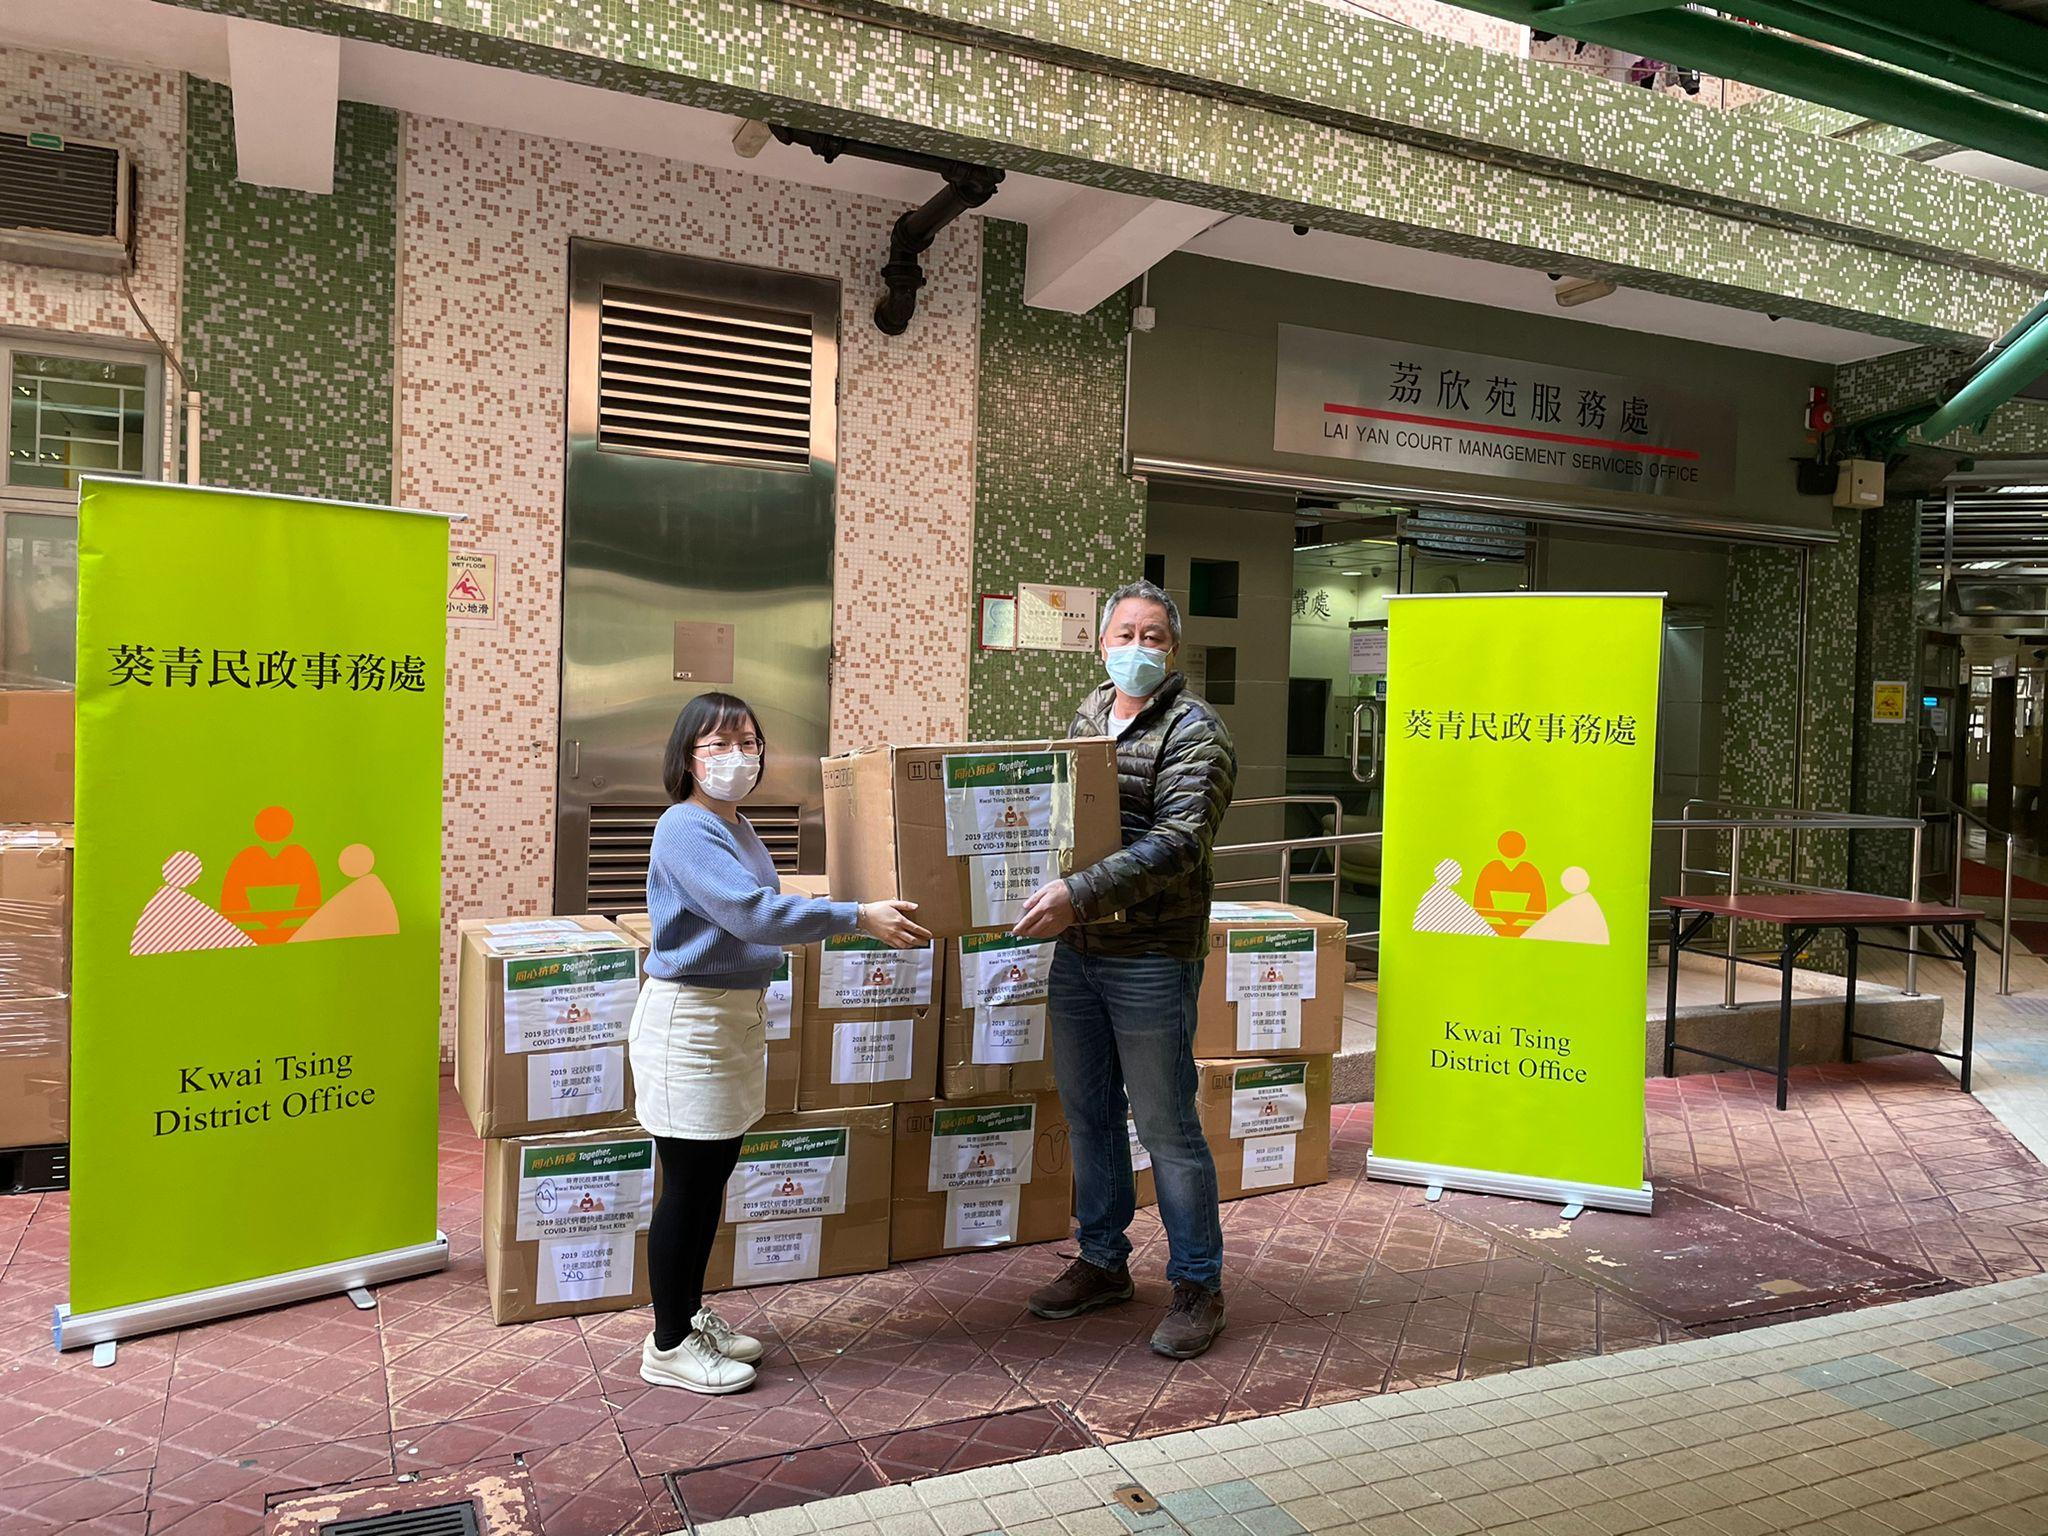 The Kwai Tsing District Office today (February 26) distributed COVID-19 rapid test kits to households, cleansing workers and property management staff living and working in Lai Yan Court for voluntary testing through the Housing Department and the property management company.